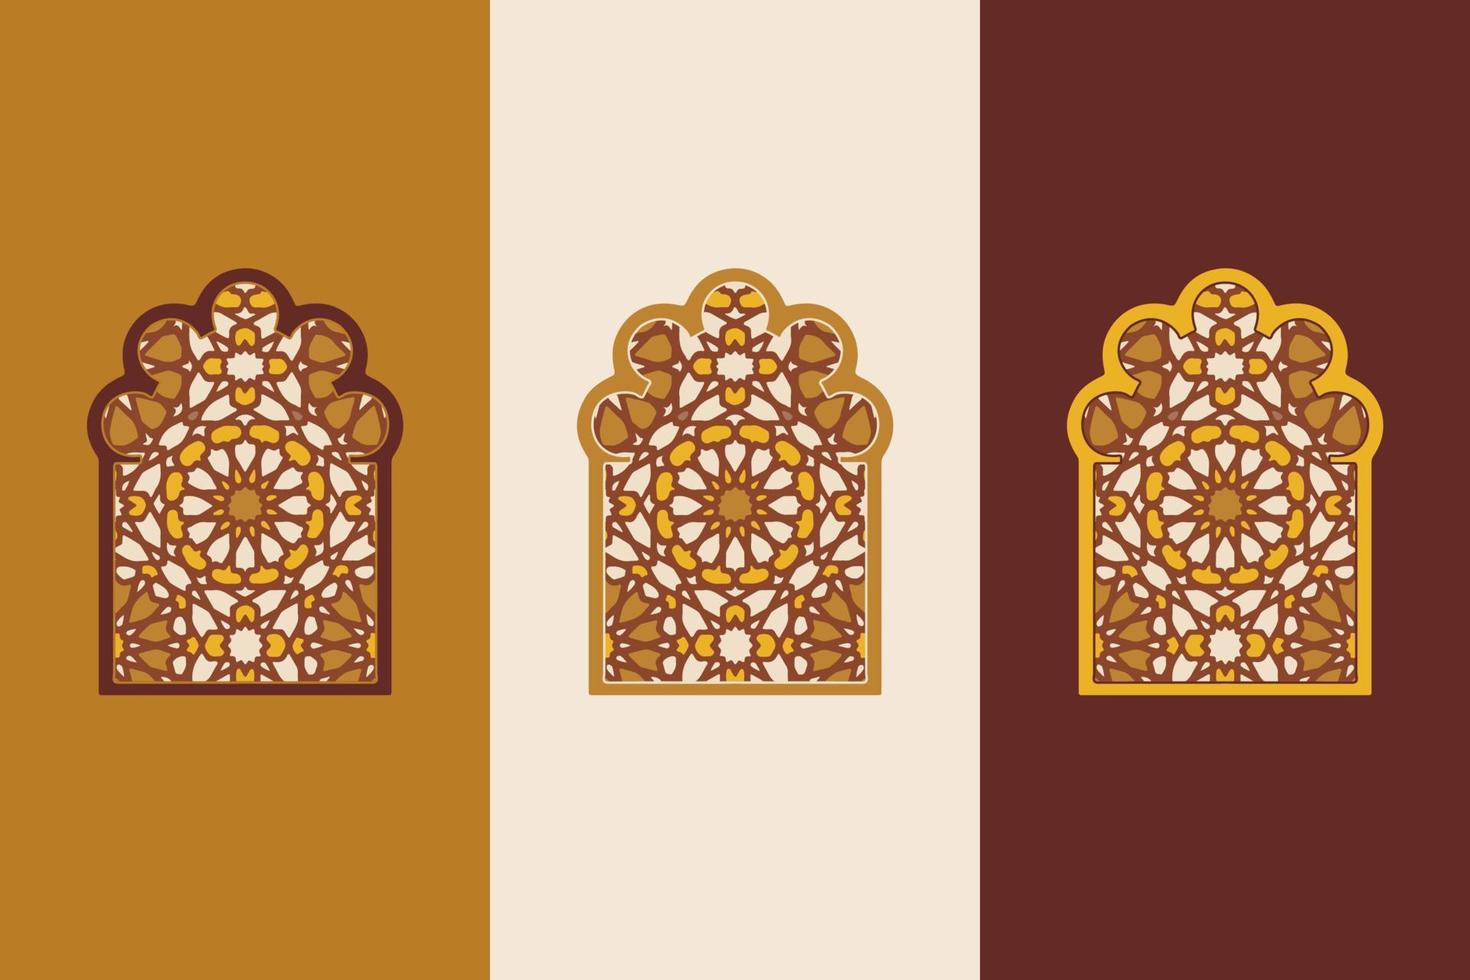 Islamic arabian oriental style windows, doors, and arches poster set mid century vector image. Moroccan contemporary abstract geometric.